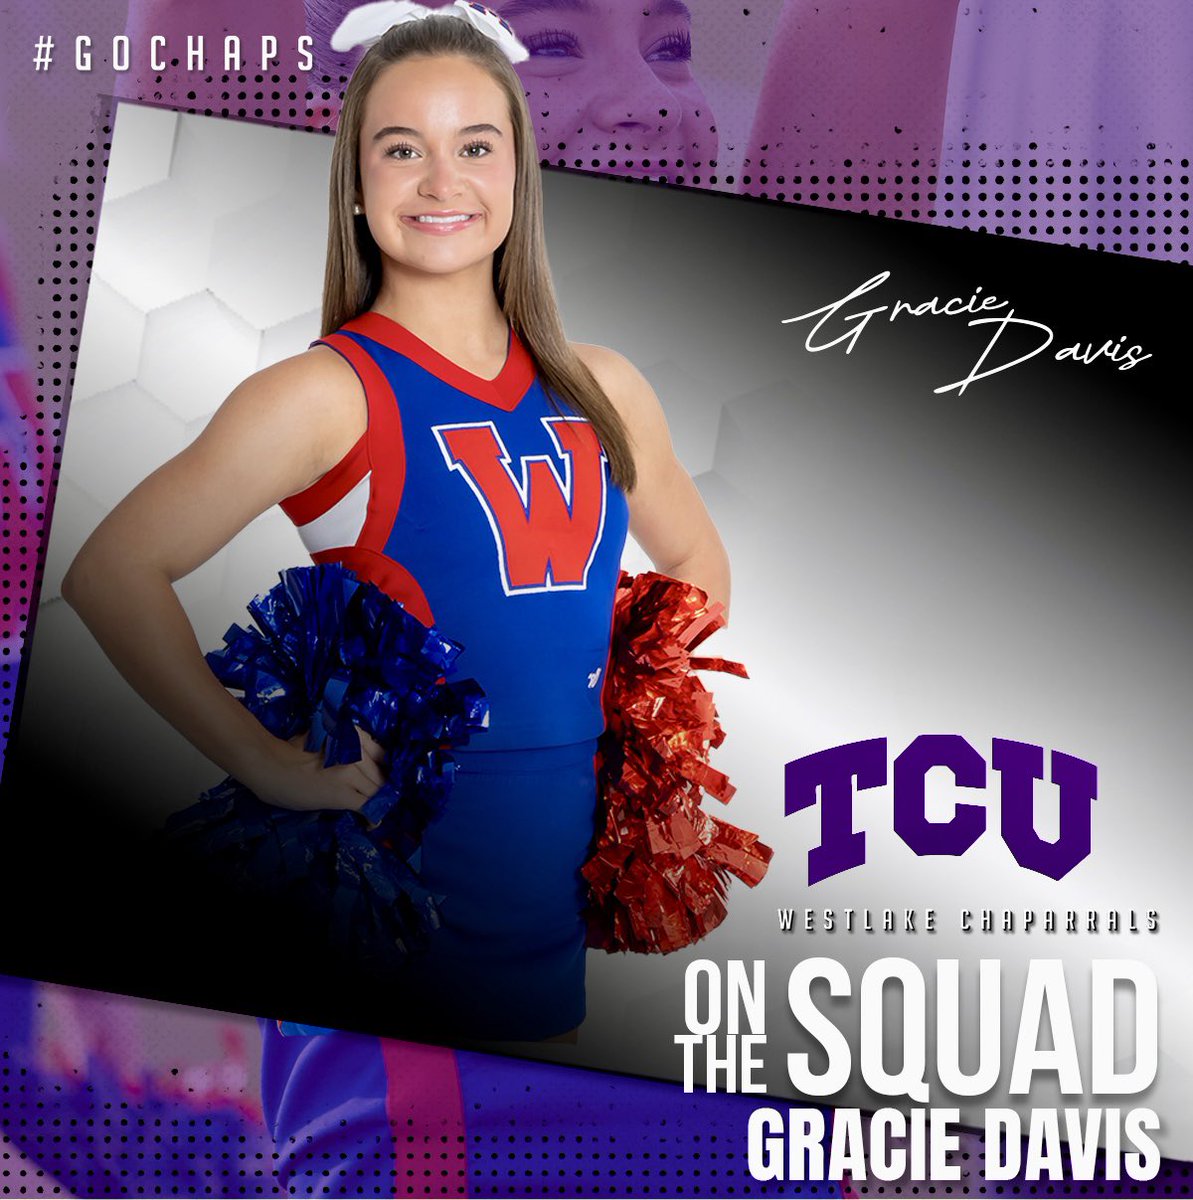 Gracie Davis is headed to Ft. Worth as she will further her academic and cheerleading career at TCU. Congratulations, Gracie. #GoChaps #GoFrogs